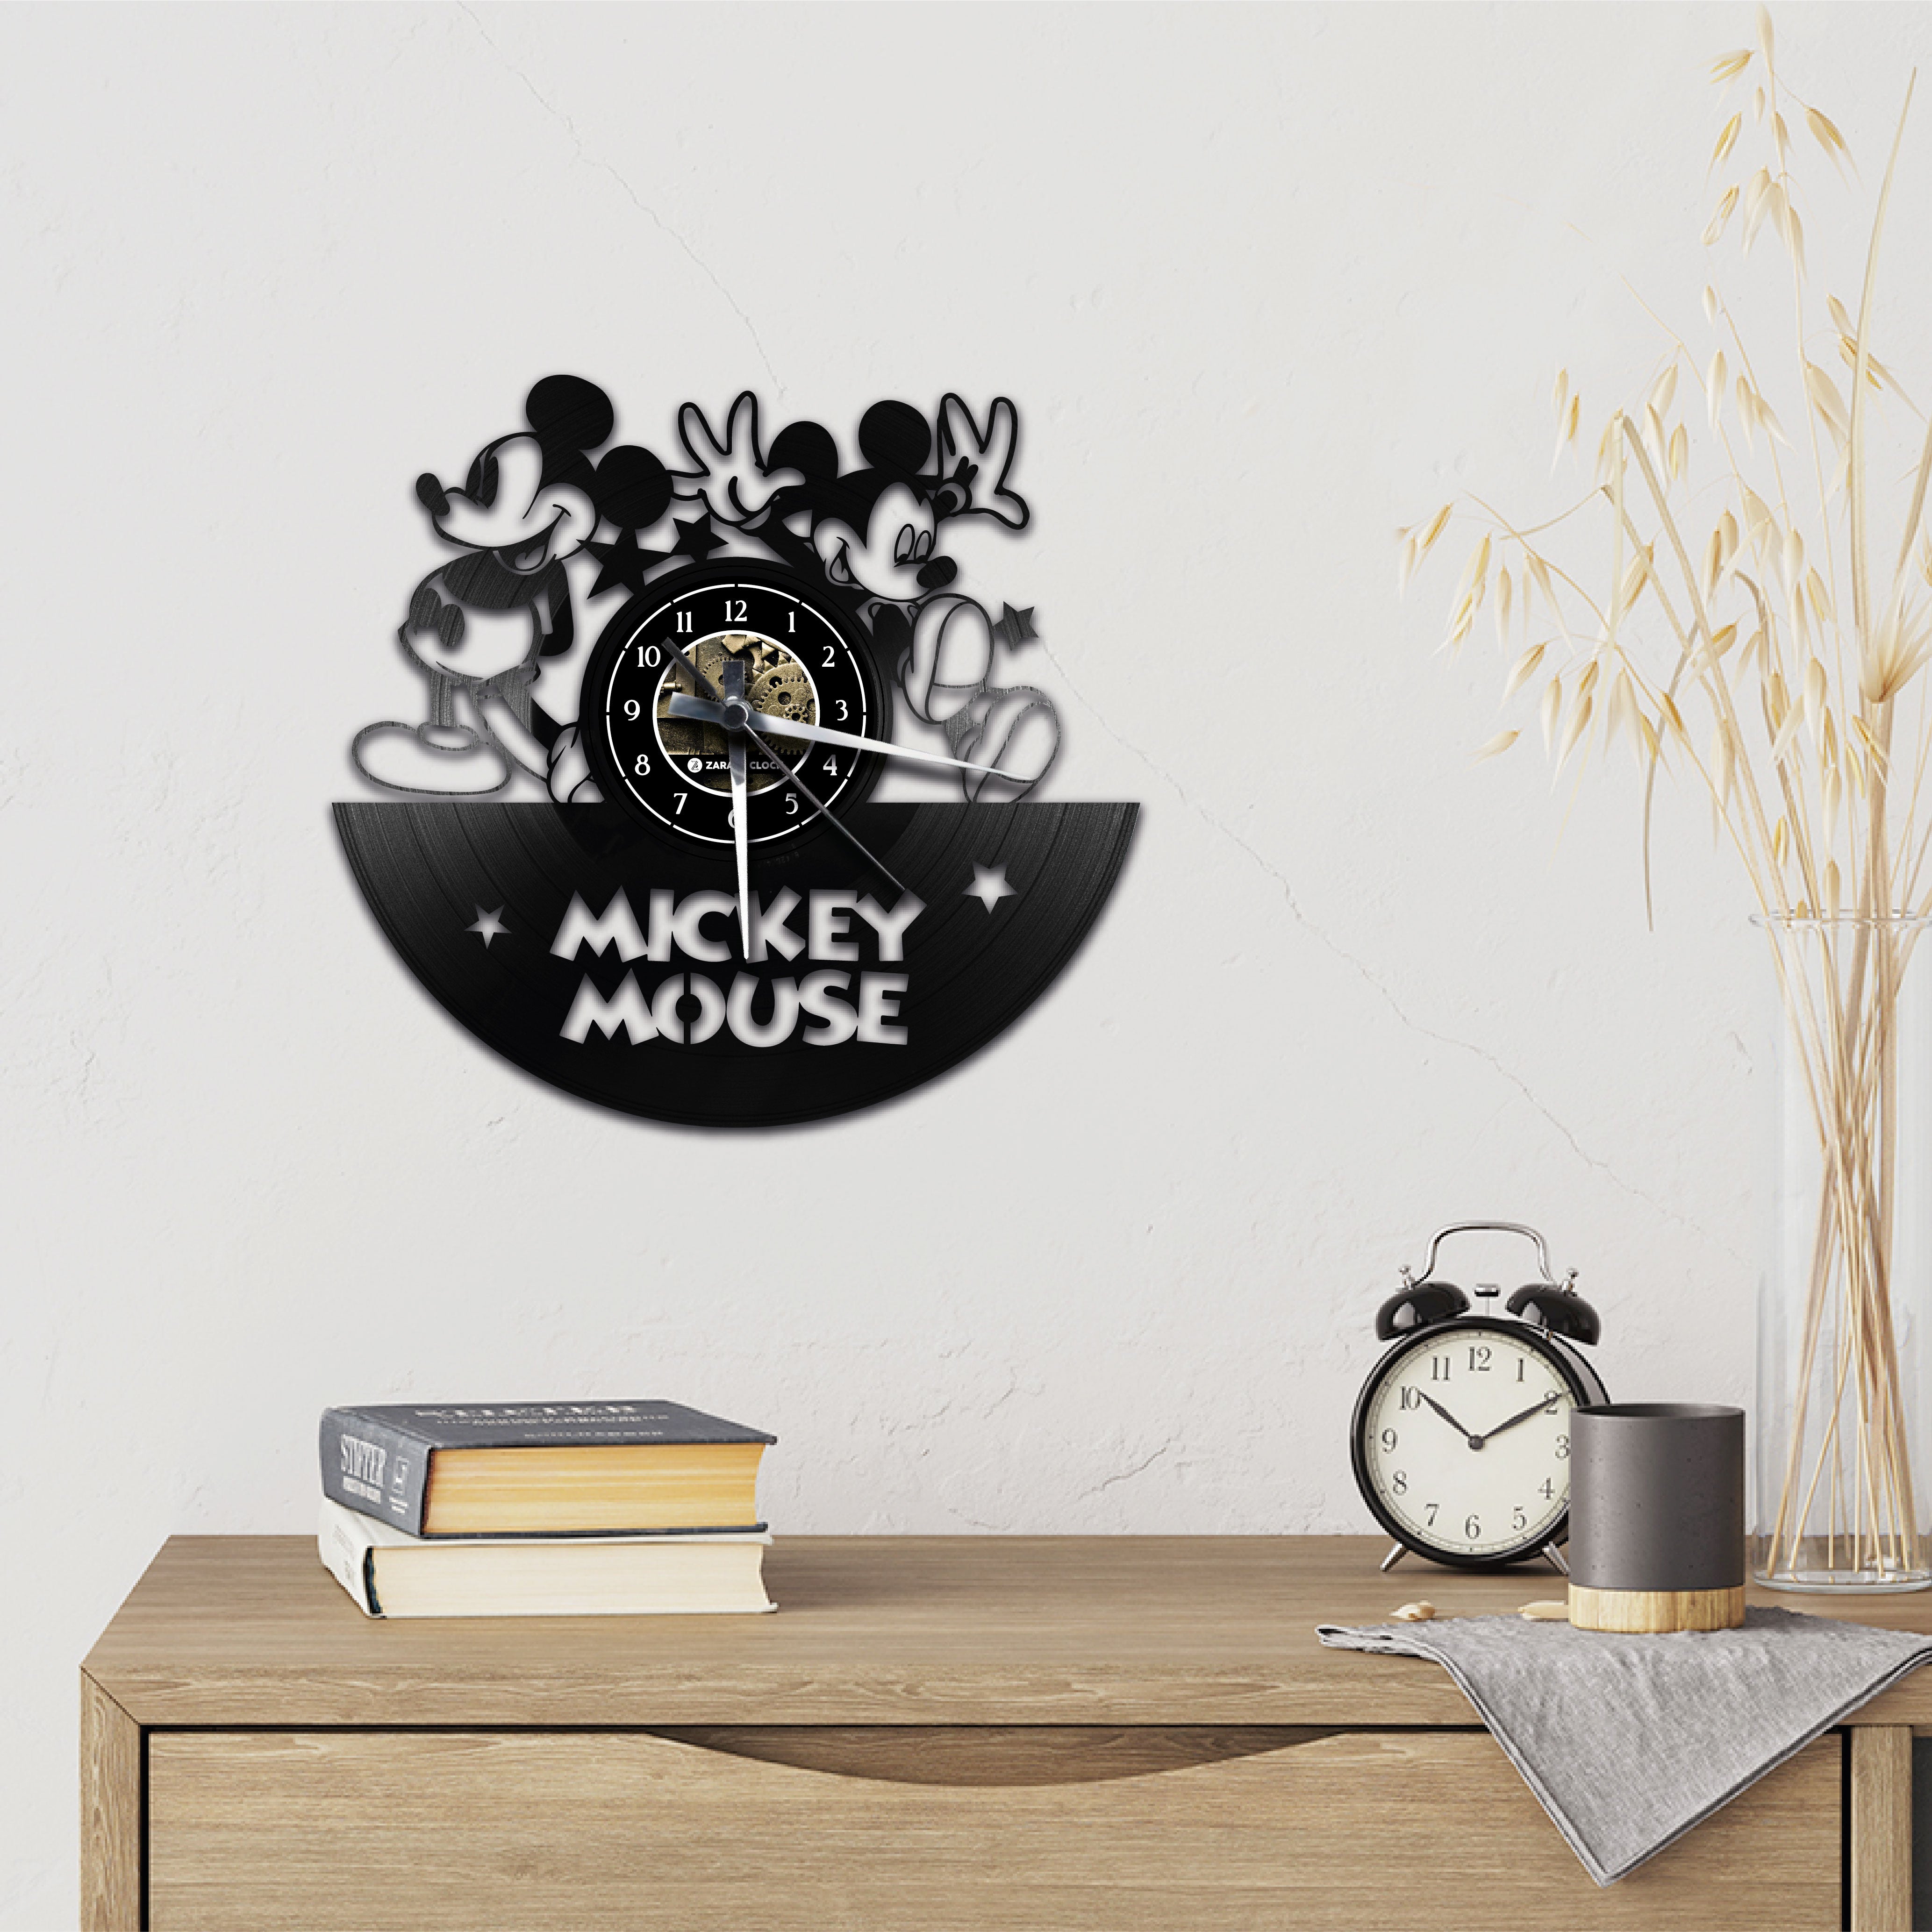 MICKEY MOUSE ✦ orologio in vinile